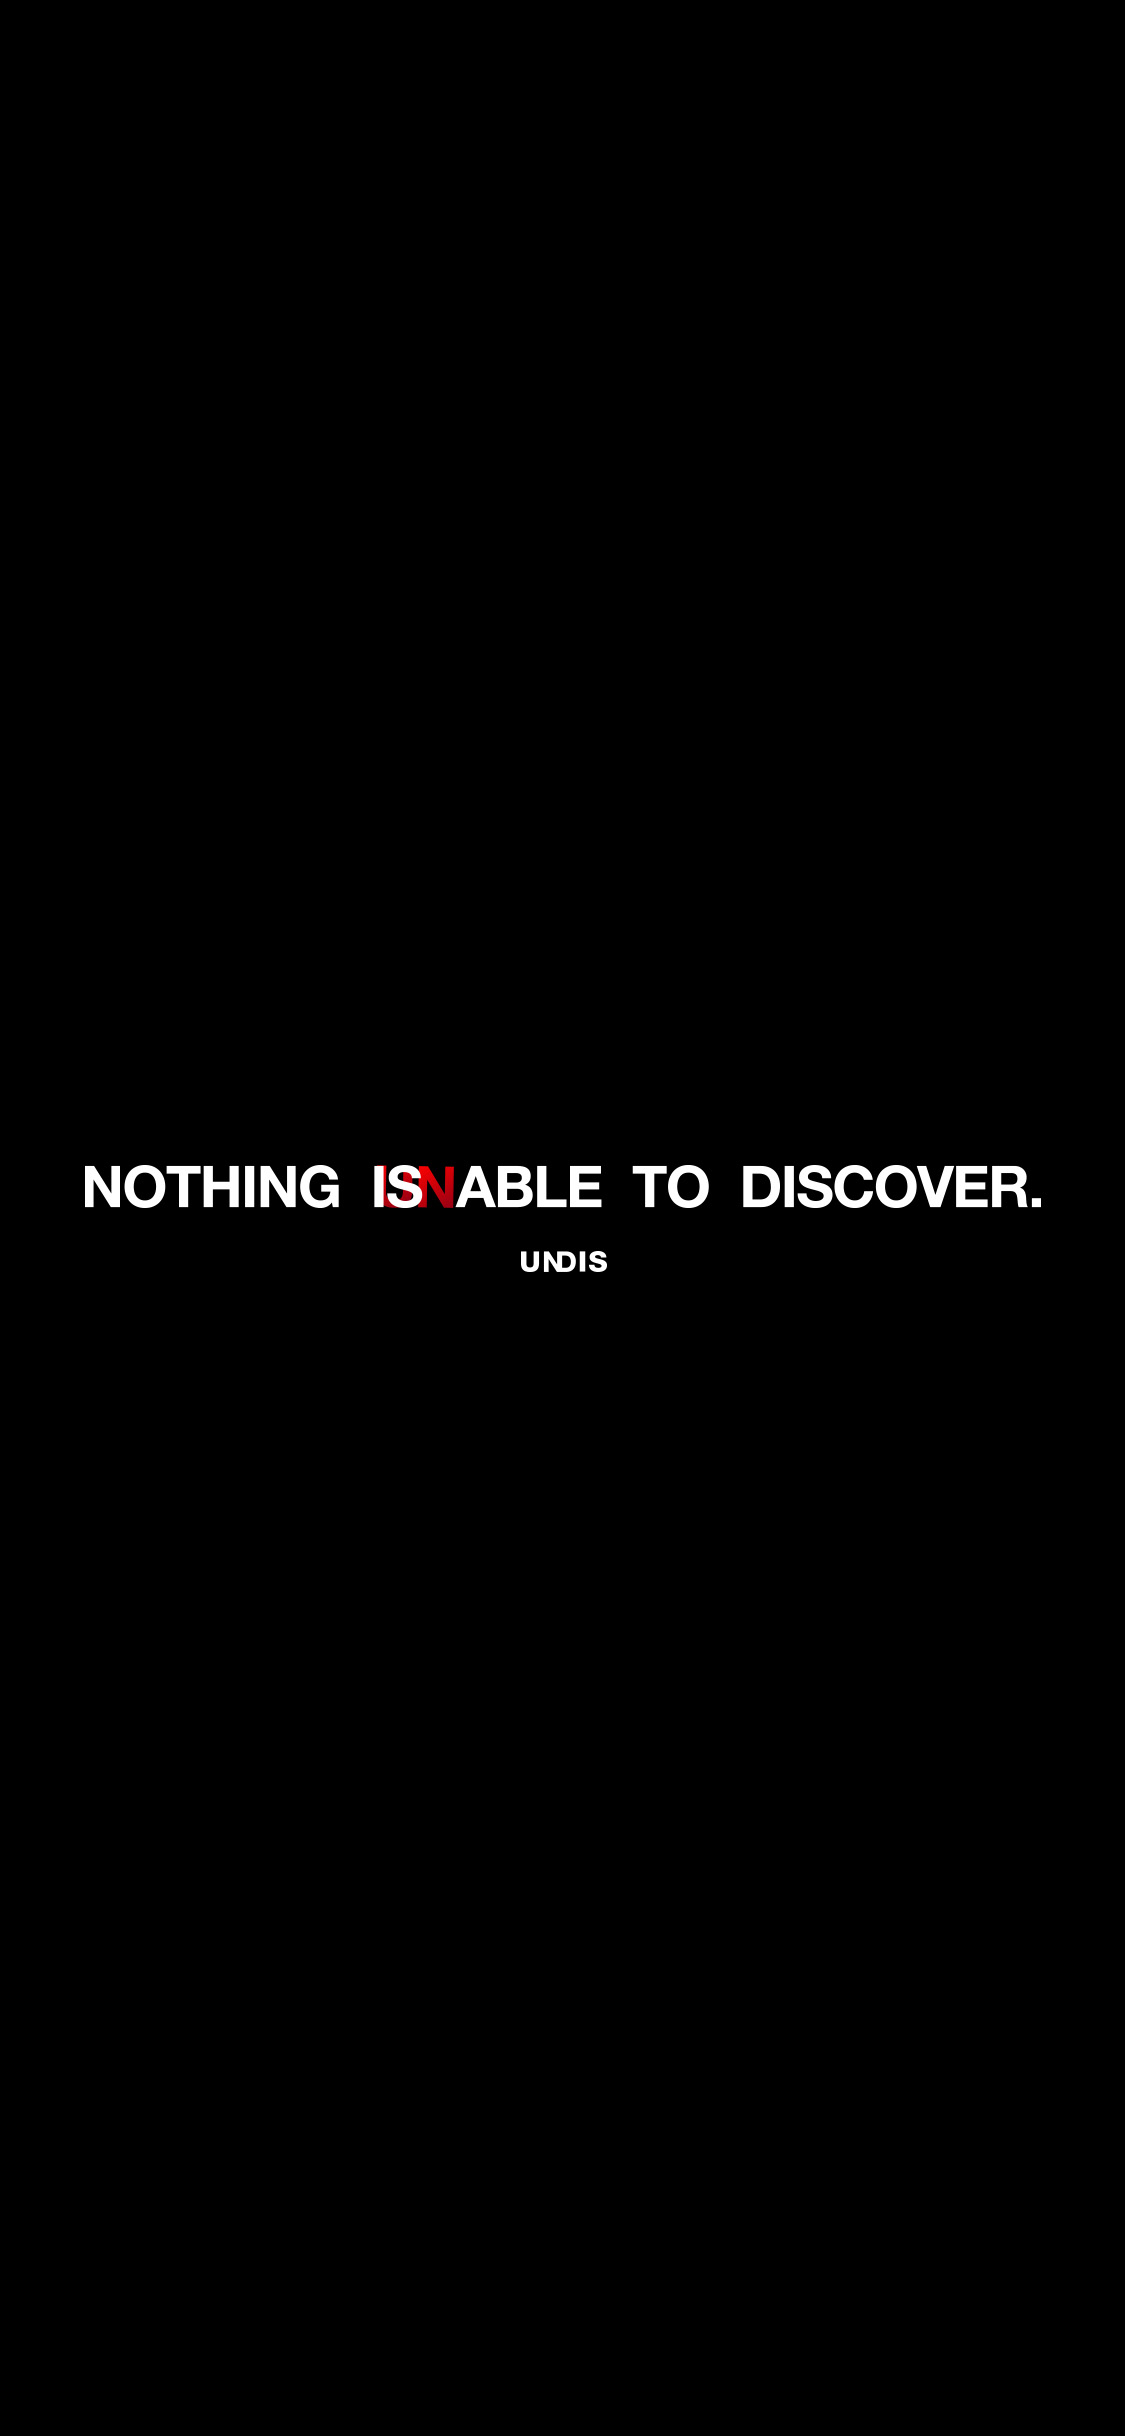 Undis Nothing Is Unable To Discover Wallpaper Undis Online Store